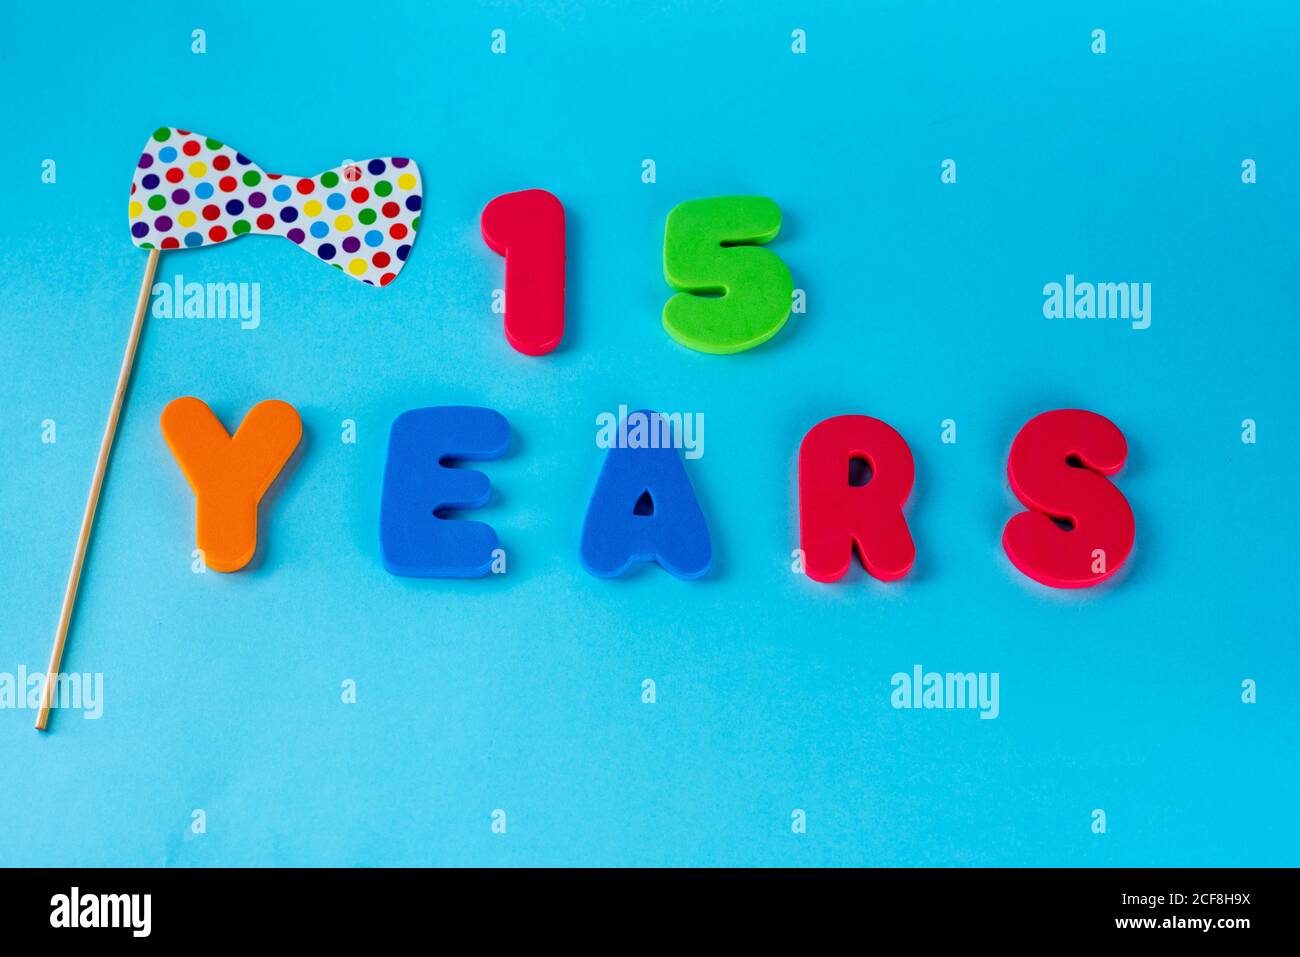 Happy Birthday Number 15 Greeting Banque D Image Et Photos Alamy